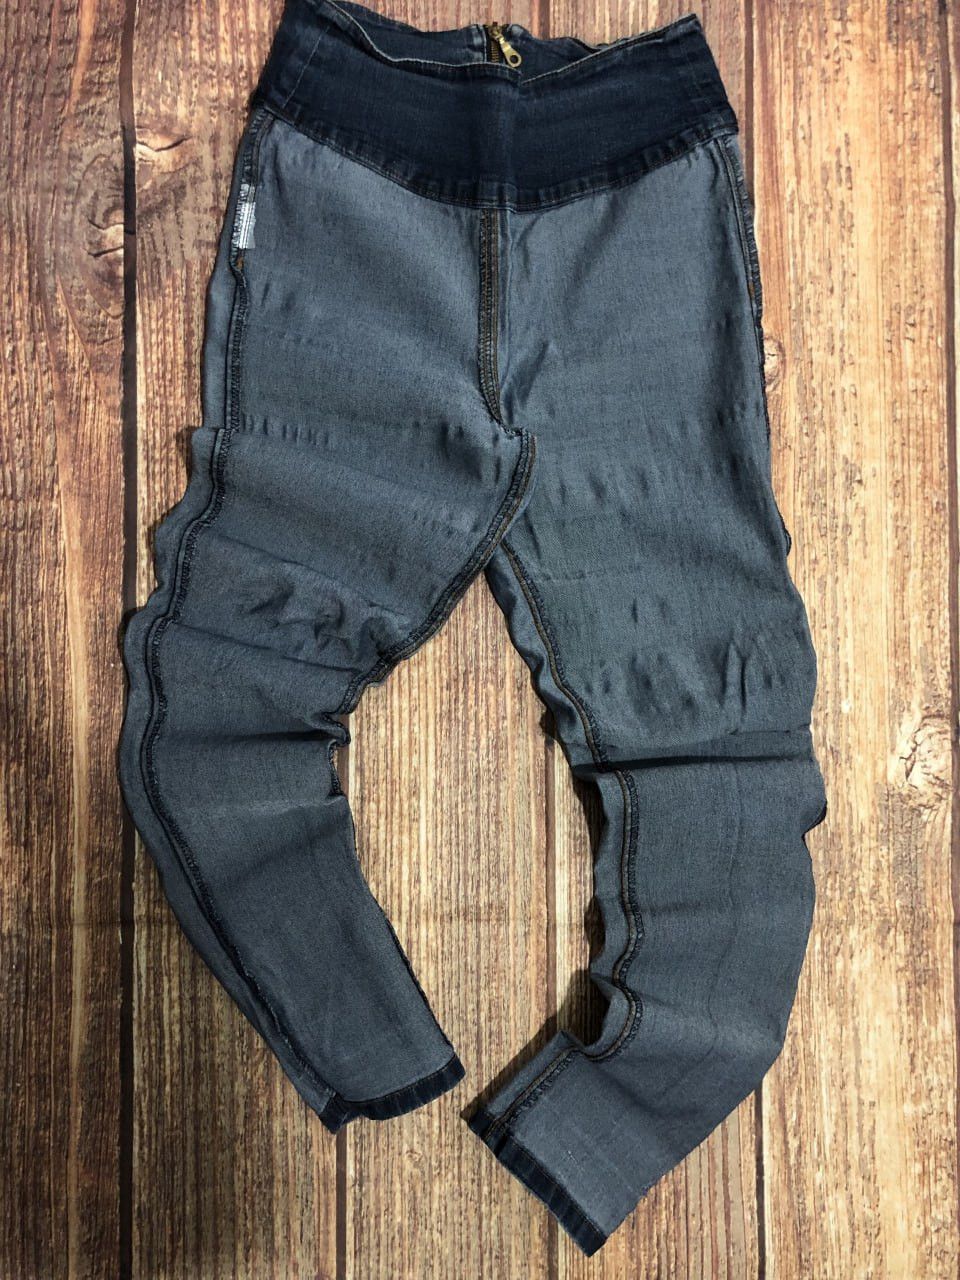 Archival Clothing Balenciaga Style Dolce & Gabbana Distressed Flared Jeans Size US 30 / EU 46 - 2 Preview